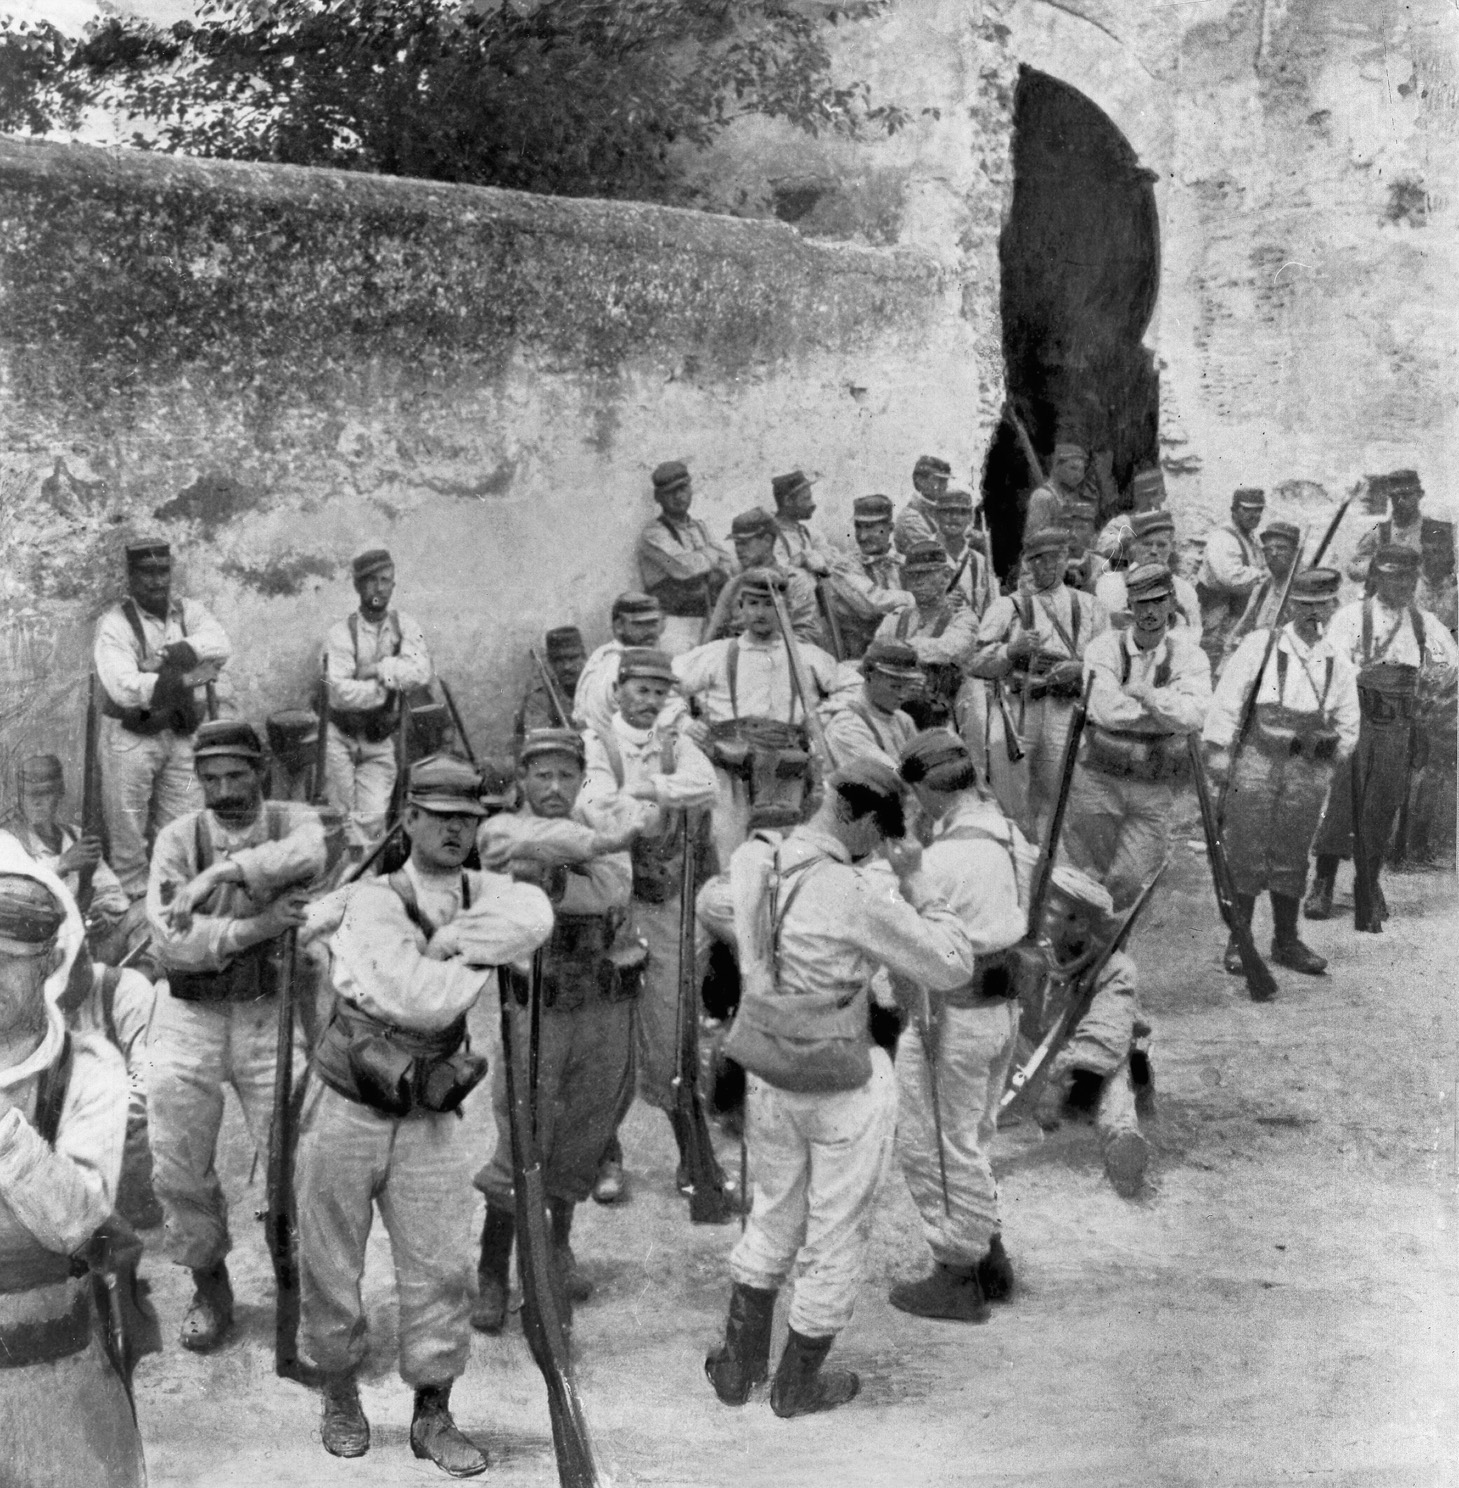 French forces in Morocco included foreign legionnaires pictured and colonial troops from West Africa, Tunisia, and Algeria. The troops, who were tough and disciplined, were equipped with bolt-action rifles, machine guns, and field artillery.